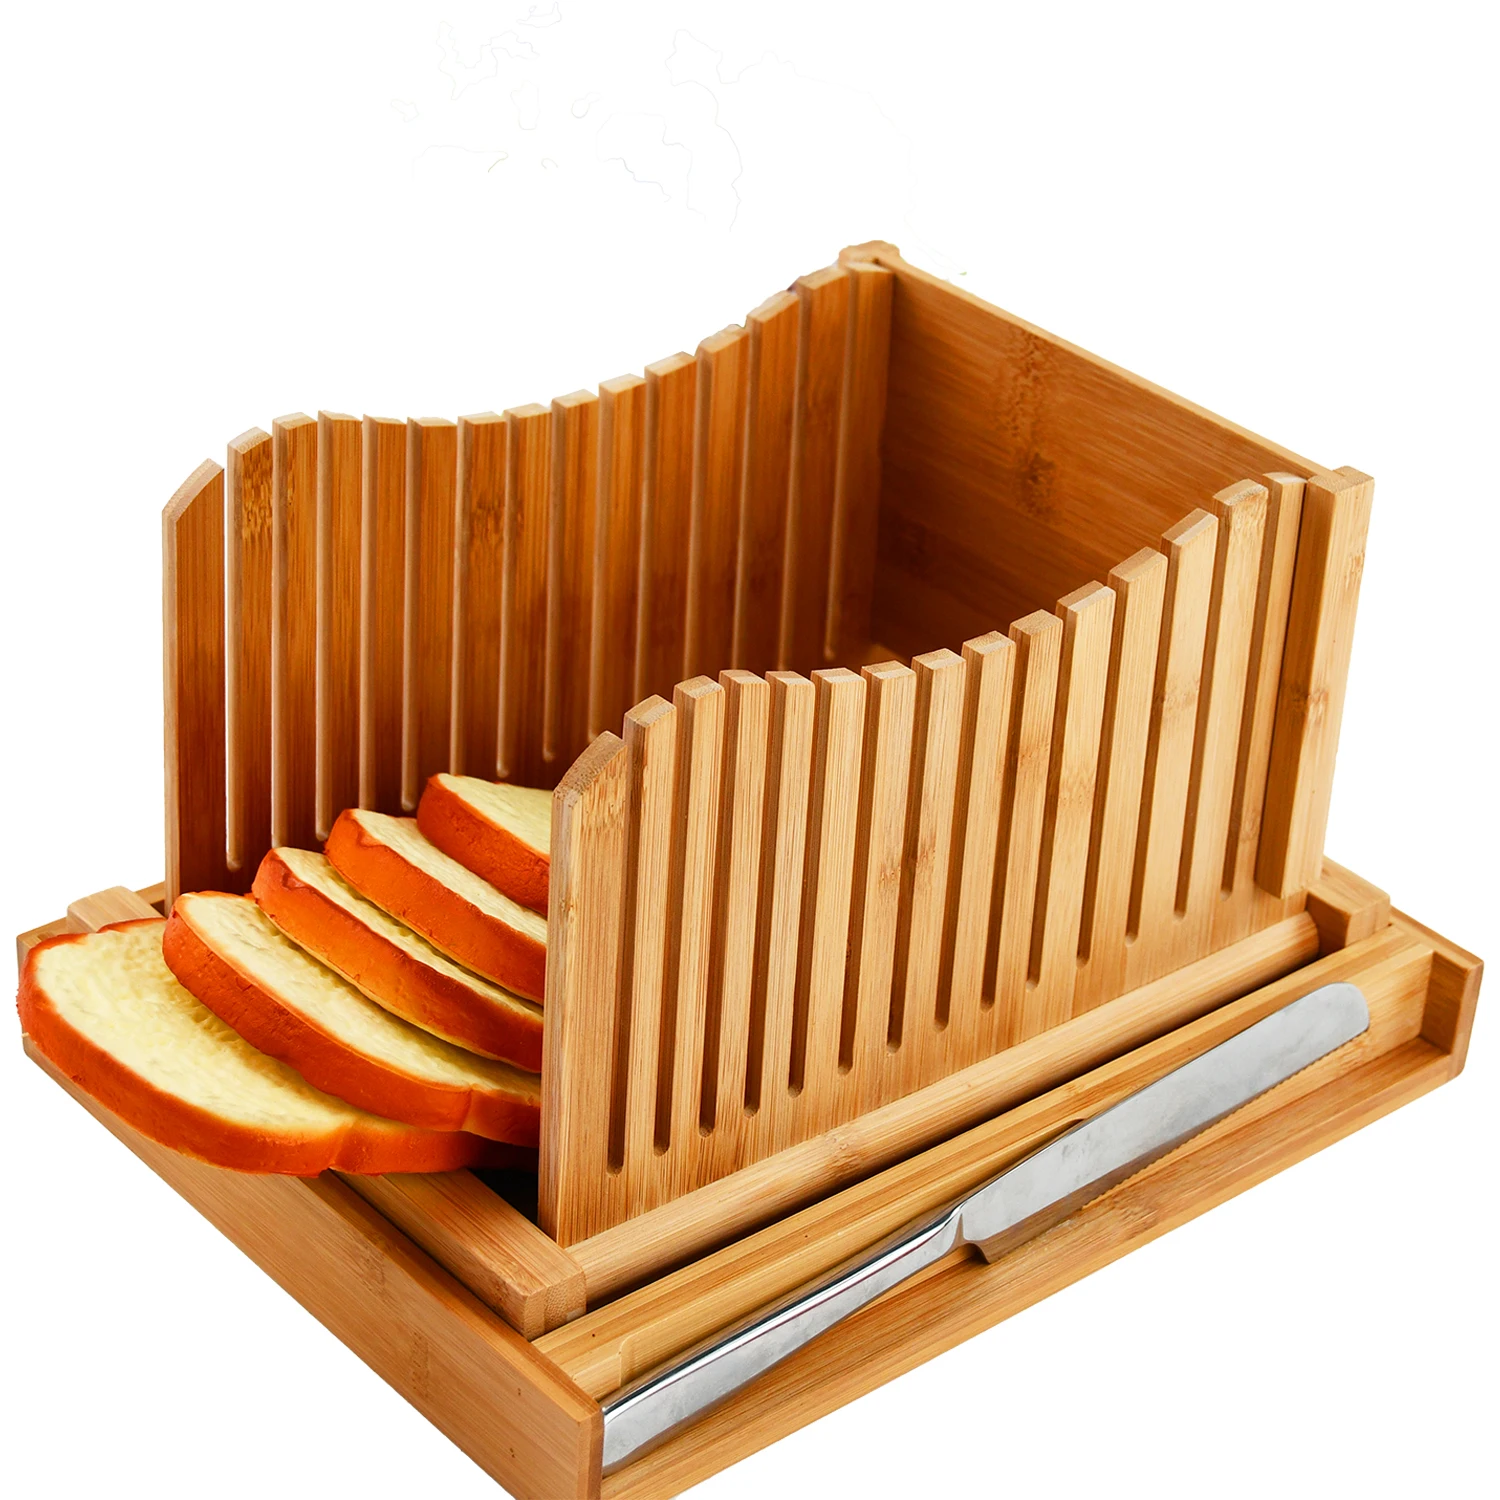 Bread Slicer Guide, Adjustable Foldable Cutting Board for Homemade